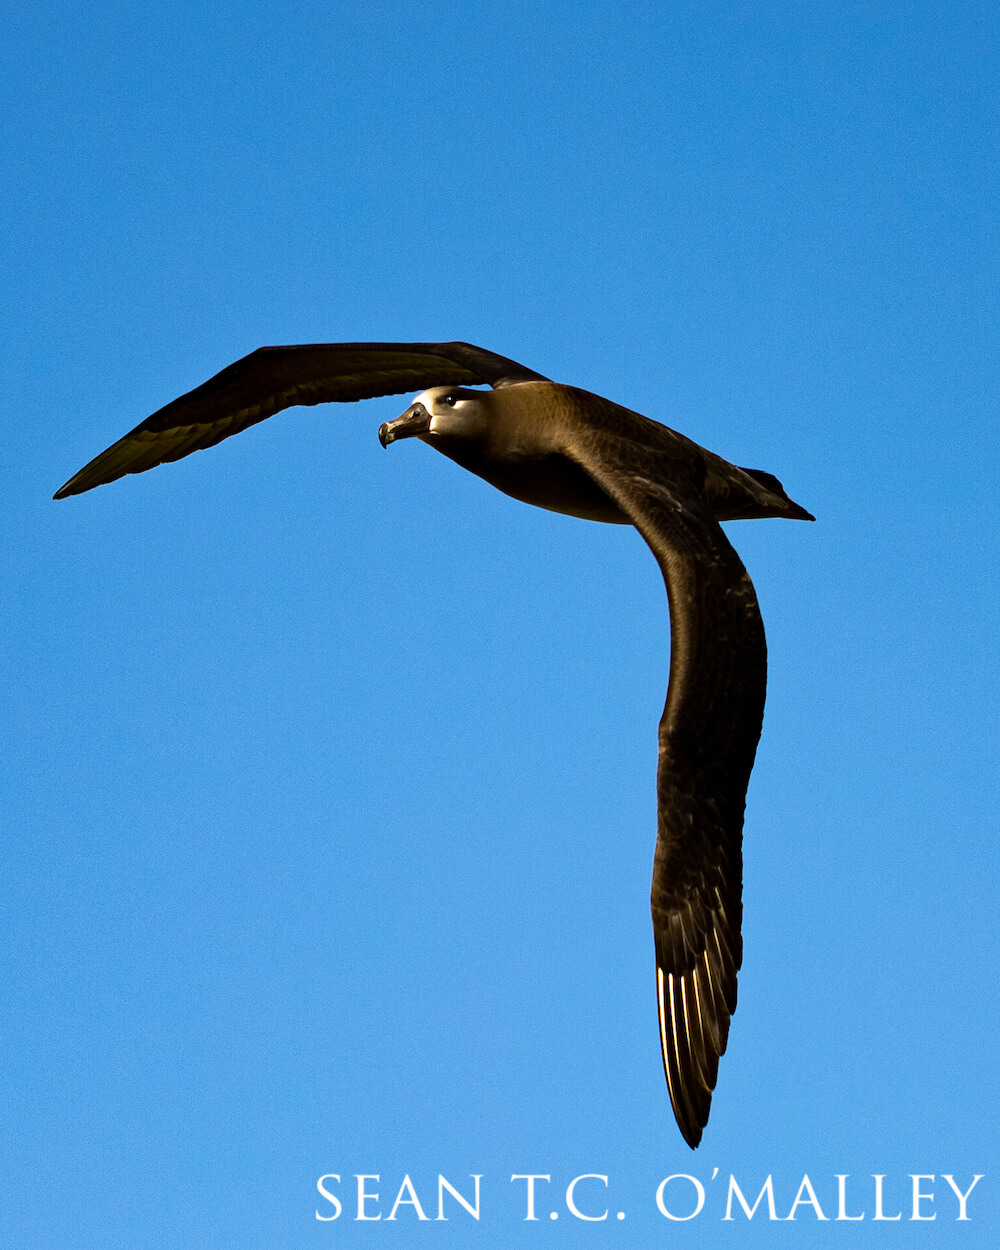 Black-footed albatross dipping its massive wing with a determined glint in its eyes.